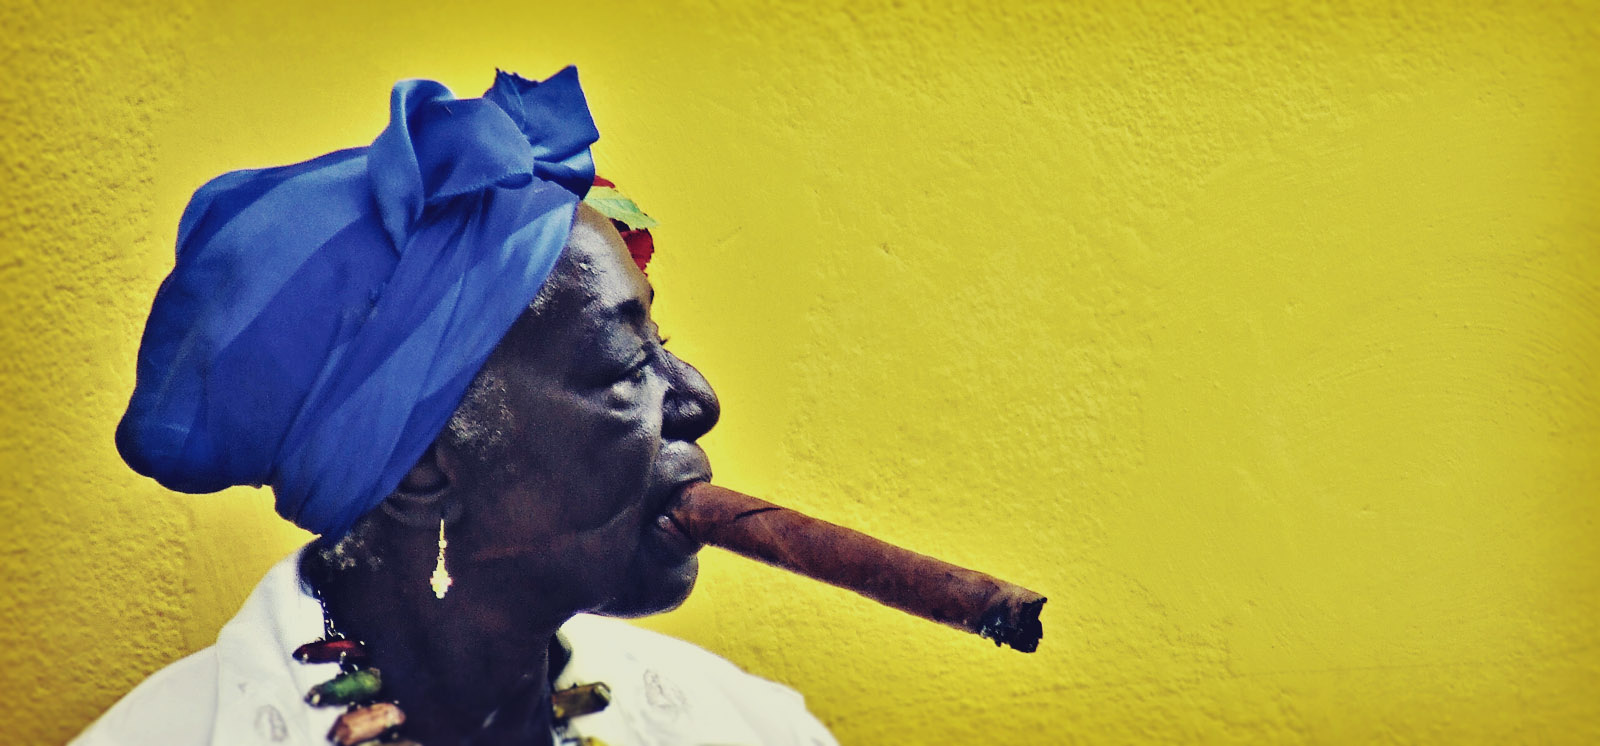 Cuban Cigars and Tobacco Legal travel to Cuba